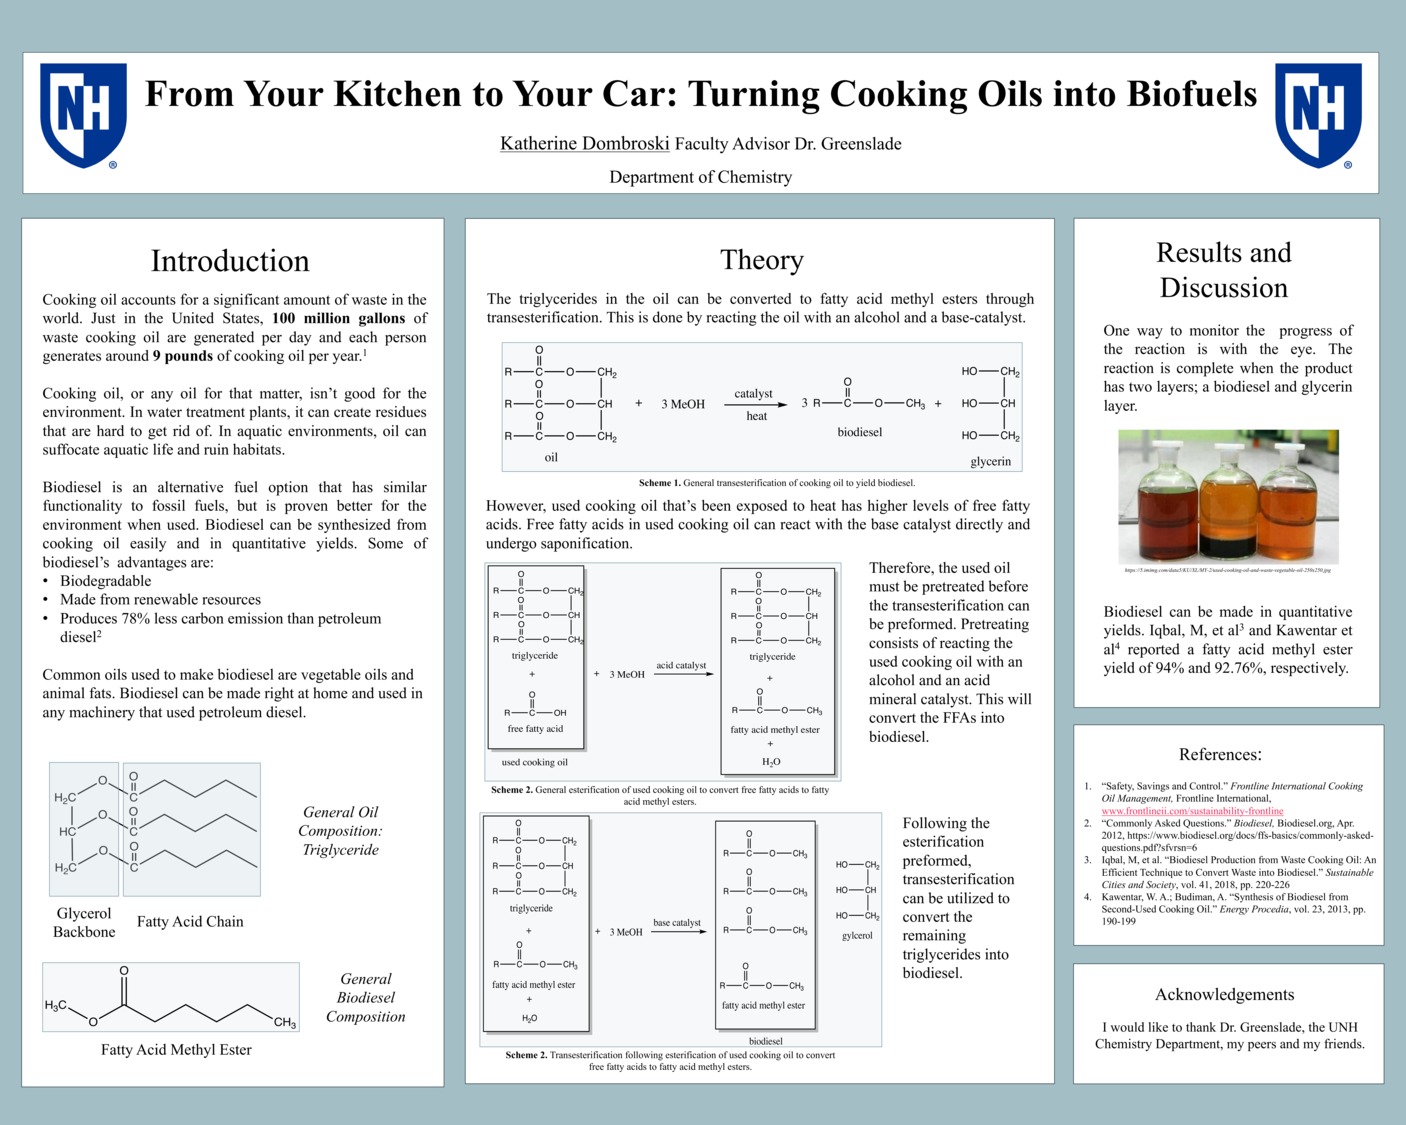 From Your Kitchen To Your Car: Turning Cooking Oils Into Biofuels by kld1004